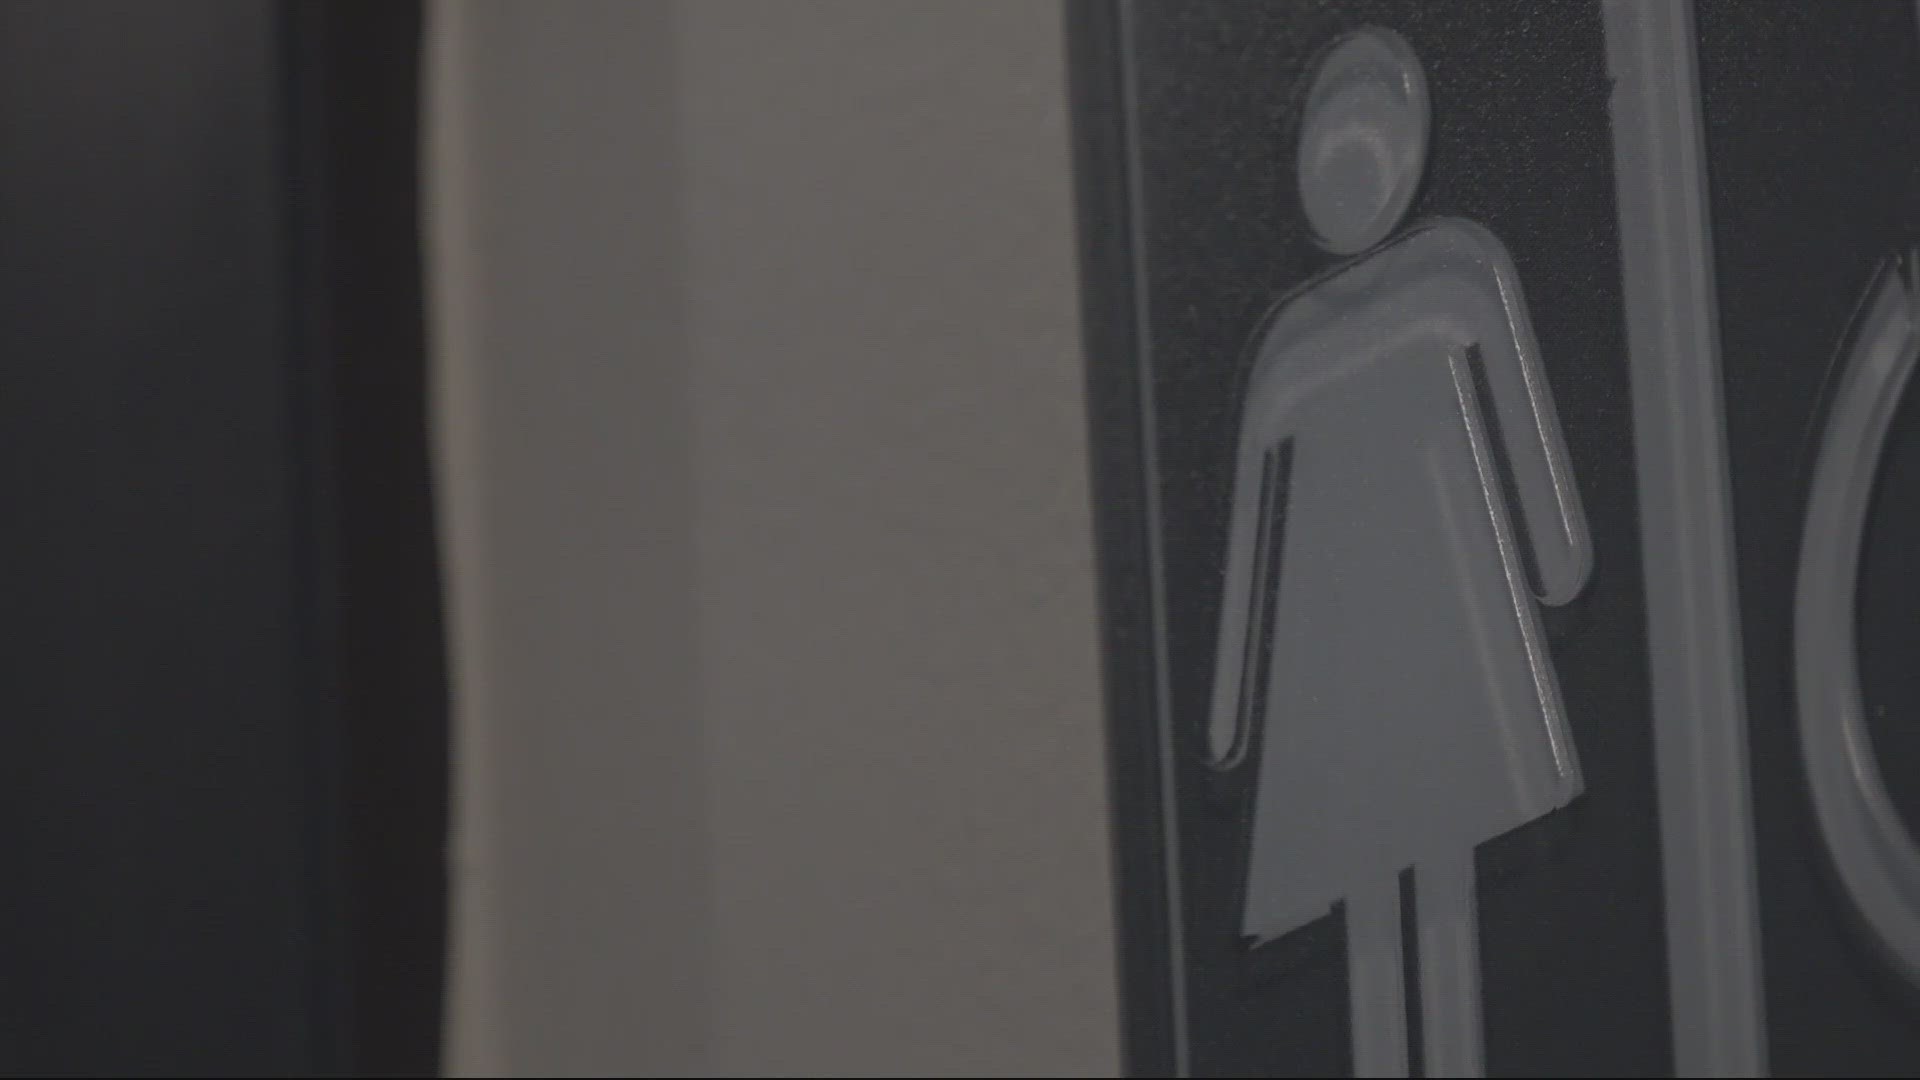 It would require people to use the bathroom belonging to their assigned sex at birth, not their gender identity.